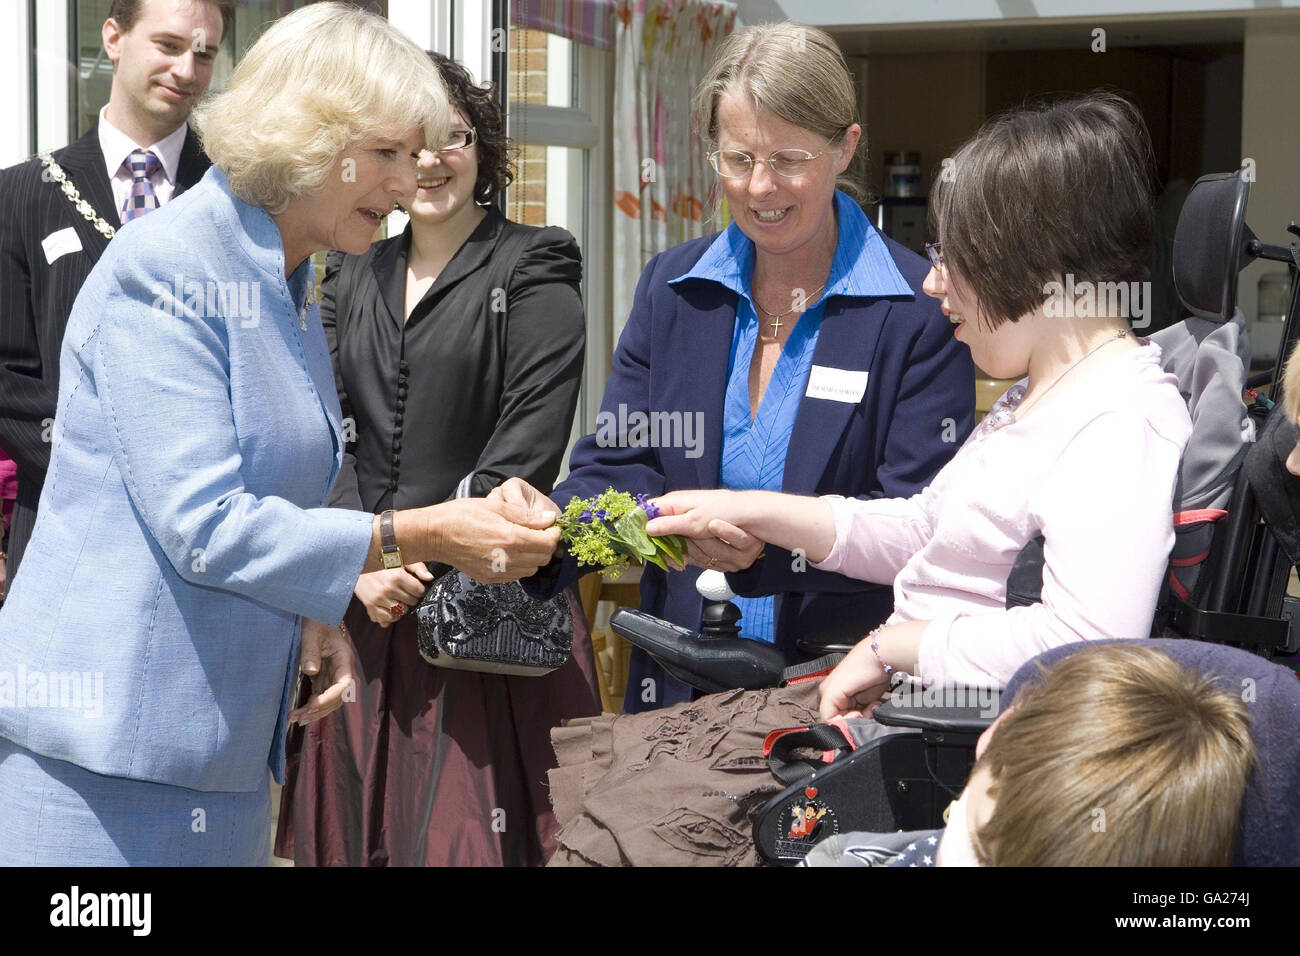 The Duchess of Cornwall is presented with a small bouquet by one of the guests during a visit to Helen and Douglas House, a hospice and respite care centre for children and young adults, in Oxford. Stock Photo